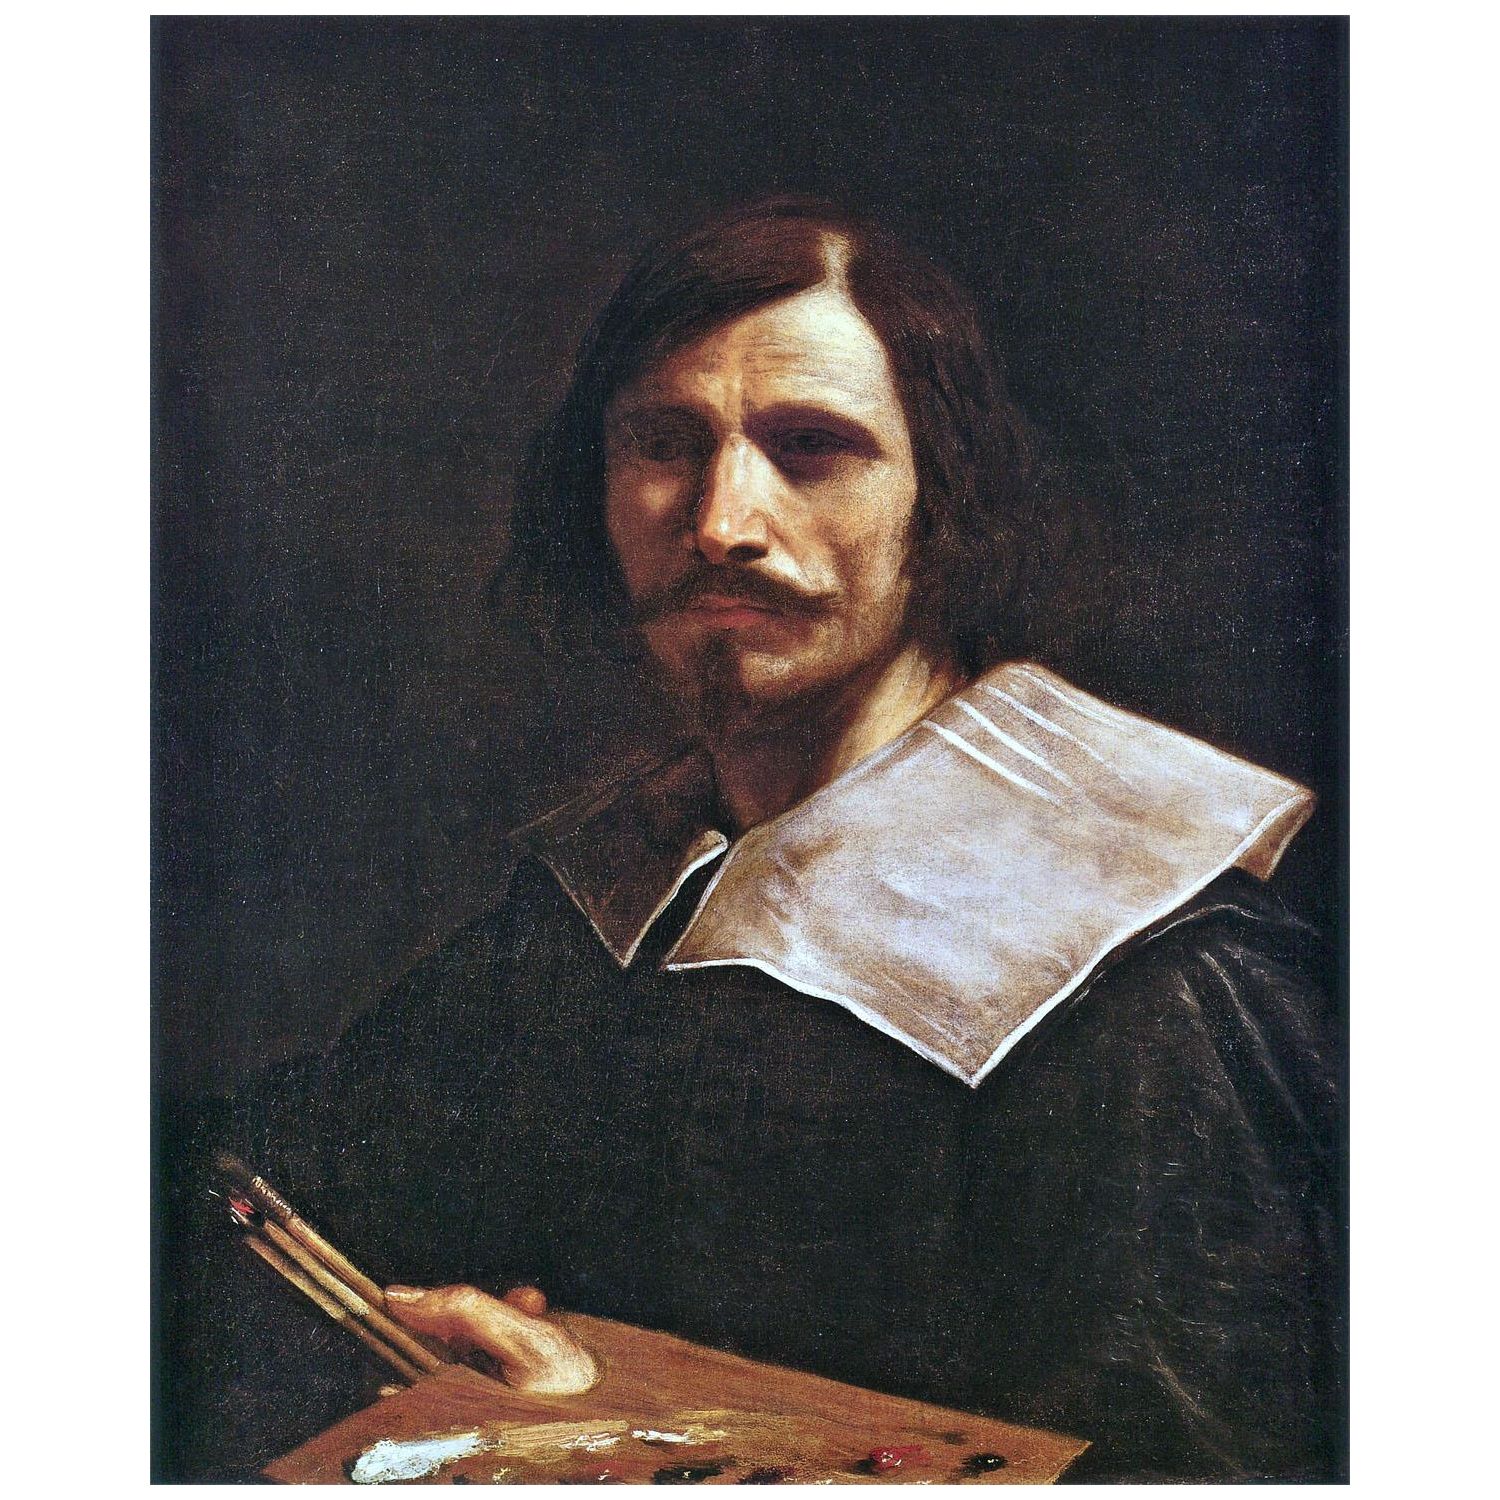 Guercino. Autoritratto. 1624. Musee du Louvre